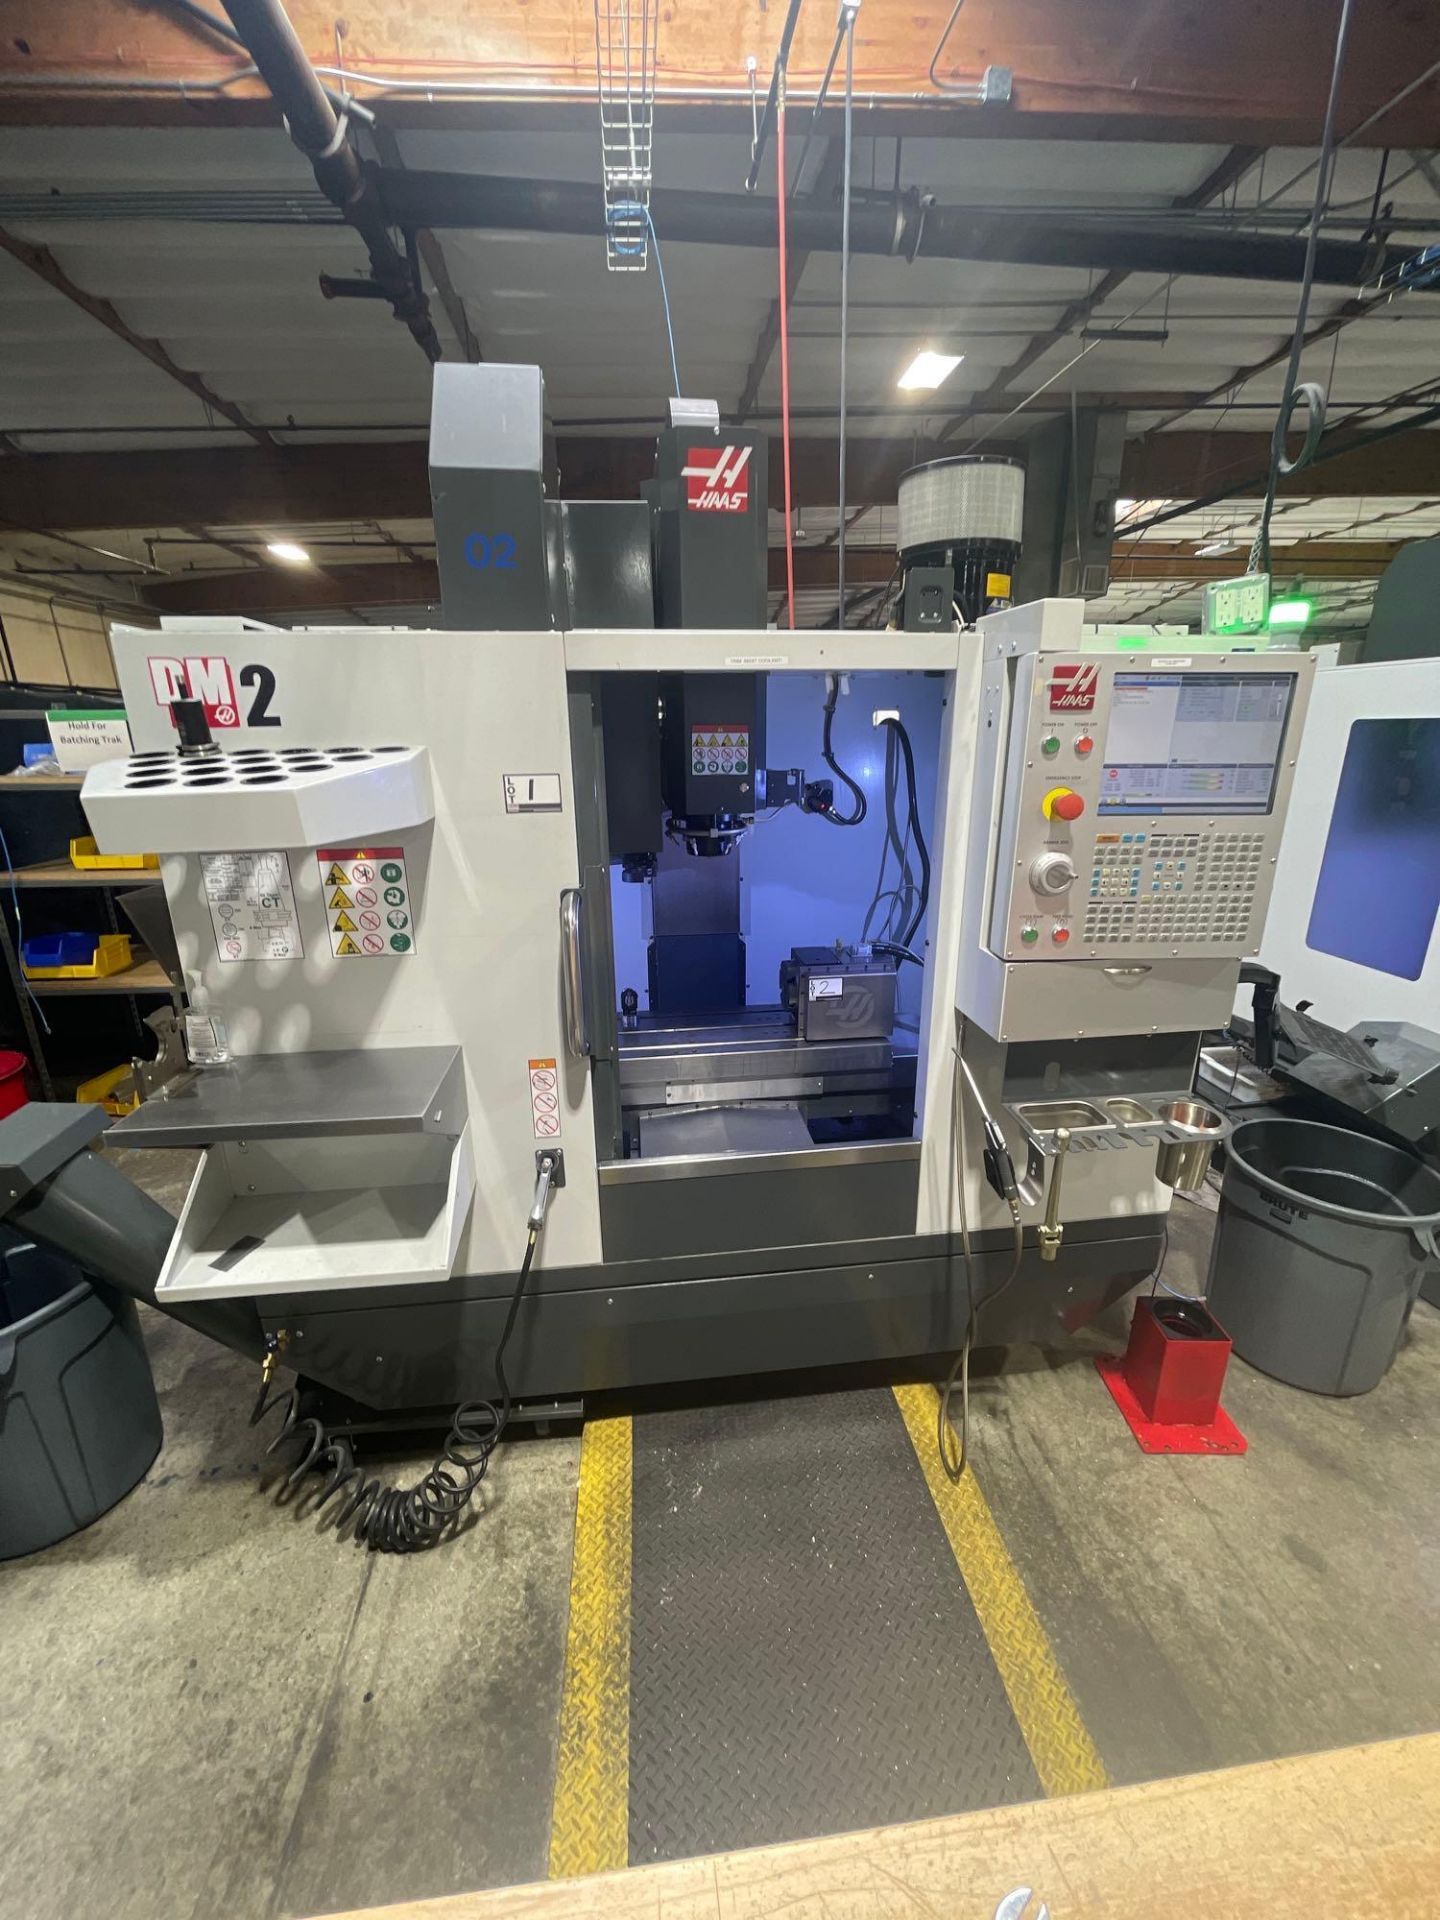 Haas DM-2, 28” x 16” 15.5” Travels, CT 40, 18+1 SMTC, 15K RPM, WIPS, New 2019 - Image 3 of 10